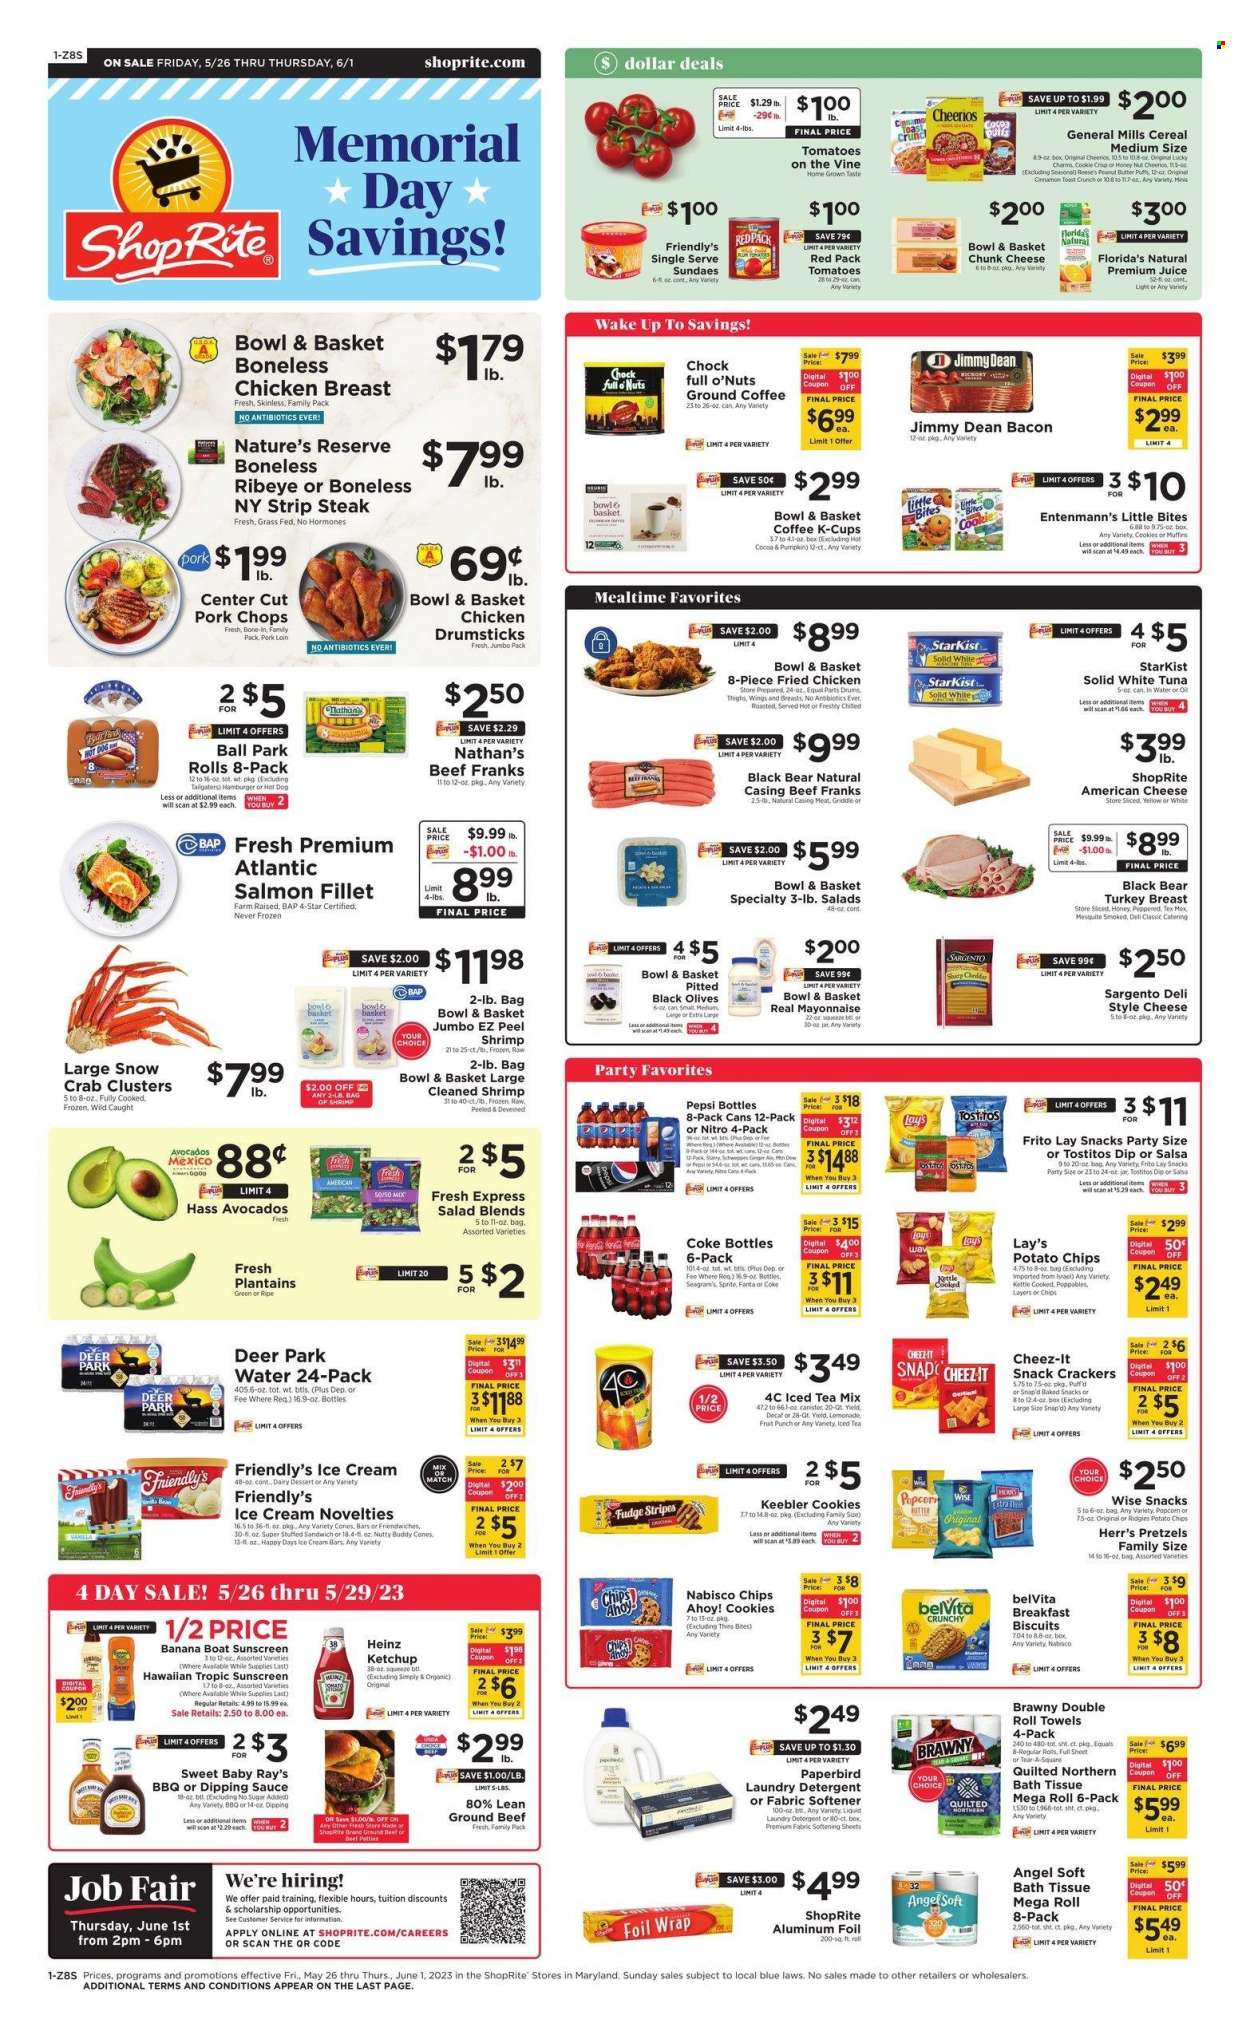 thumbnail - ShopRite Flyer - 05/26/2023 - 06/01/2023 - Sales products - pretzels, Bowl & Basket, puffs, Entenmann's, dessert, salad, avocado, salmon, salmon fillet, tuna, crab, shrimps, StarKist, crab clusters, hot dog, hamburger, sauce, fried chicken, Jimmy Dean, ready meal, snack, frankfurters, american cheese, cheese, chunk cheese, Sargento, mayonnaise, dip, ice cream, ice cream bars, Reese's, Friendly's Ice Cream, cookies, fudge, crackers, biscuit, Chips Ahoy!, Little Bites, Florida's Natural, Keebler, Nabisco, General Mills, potato chips, Lay’s, Thins, popcorn, Cheez-It, Tostitos, Heinz, olives, cereals, Cheerios, belVita, cinnamon, ketchup, salsa, peanut butter, Coca-Cola, ginger ale, lemonade, Schweppes, Sprite, Pepsi, juice, Fanta, ice tea, soft drink, fruit punch, Coke, water, hot cocoa, ground coffee, coffee capsules, K-Cups, turkey breast, chicken breasts, chicken drumsticks, chicken, turkey, beef meat, ground beef, steak, striploin steak, pork chops, pork loin, pork meat, bath tissue, Quilted Northern, paper towels, detergent, fabric softener, laundry detergent, Hawaiian Tropic, aluminium foil, plantains. Page 1.